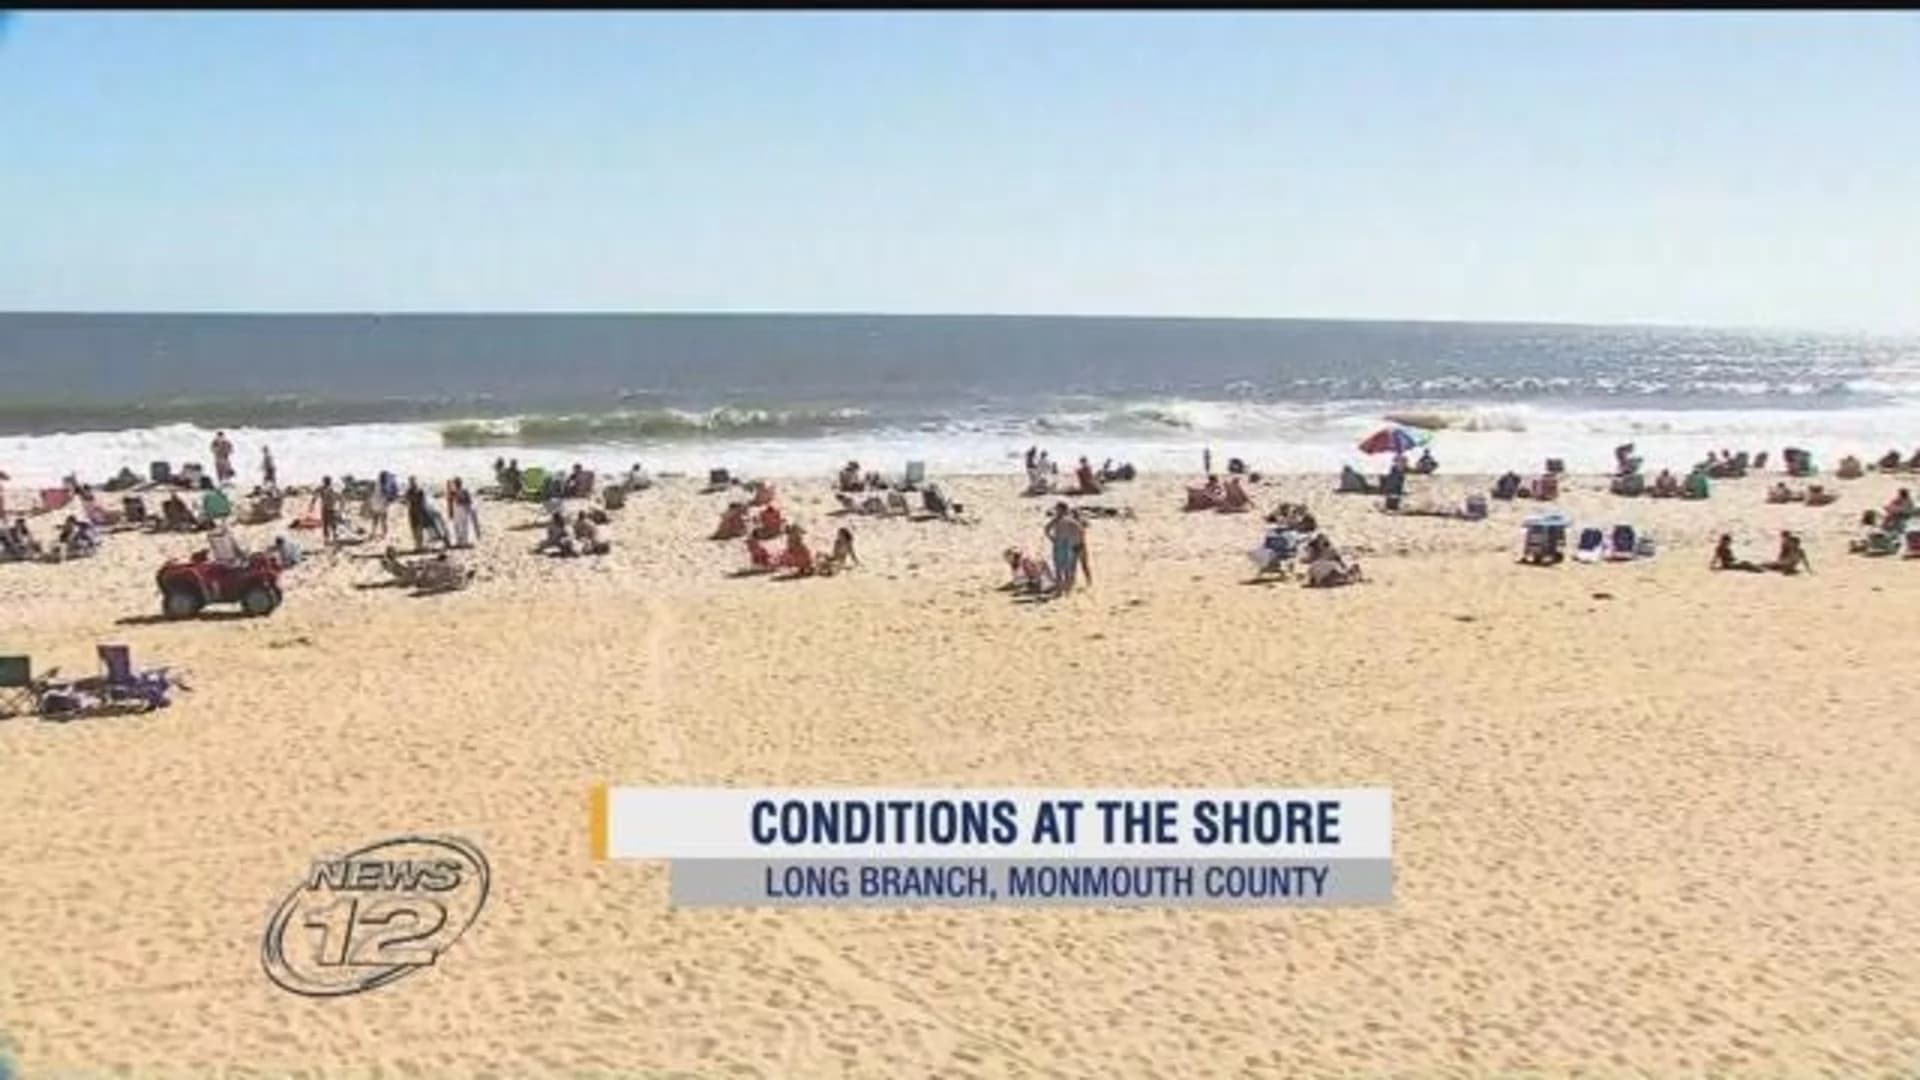 Beachgoers warned to stay out of water as warm temps draw crowds